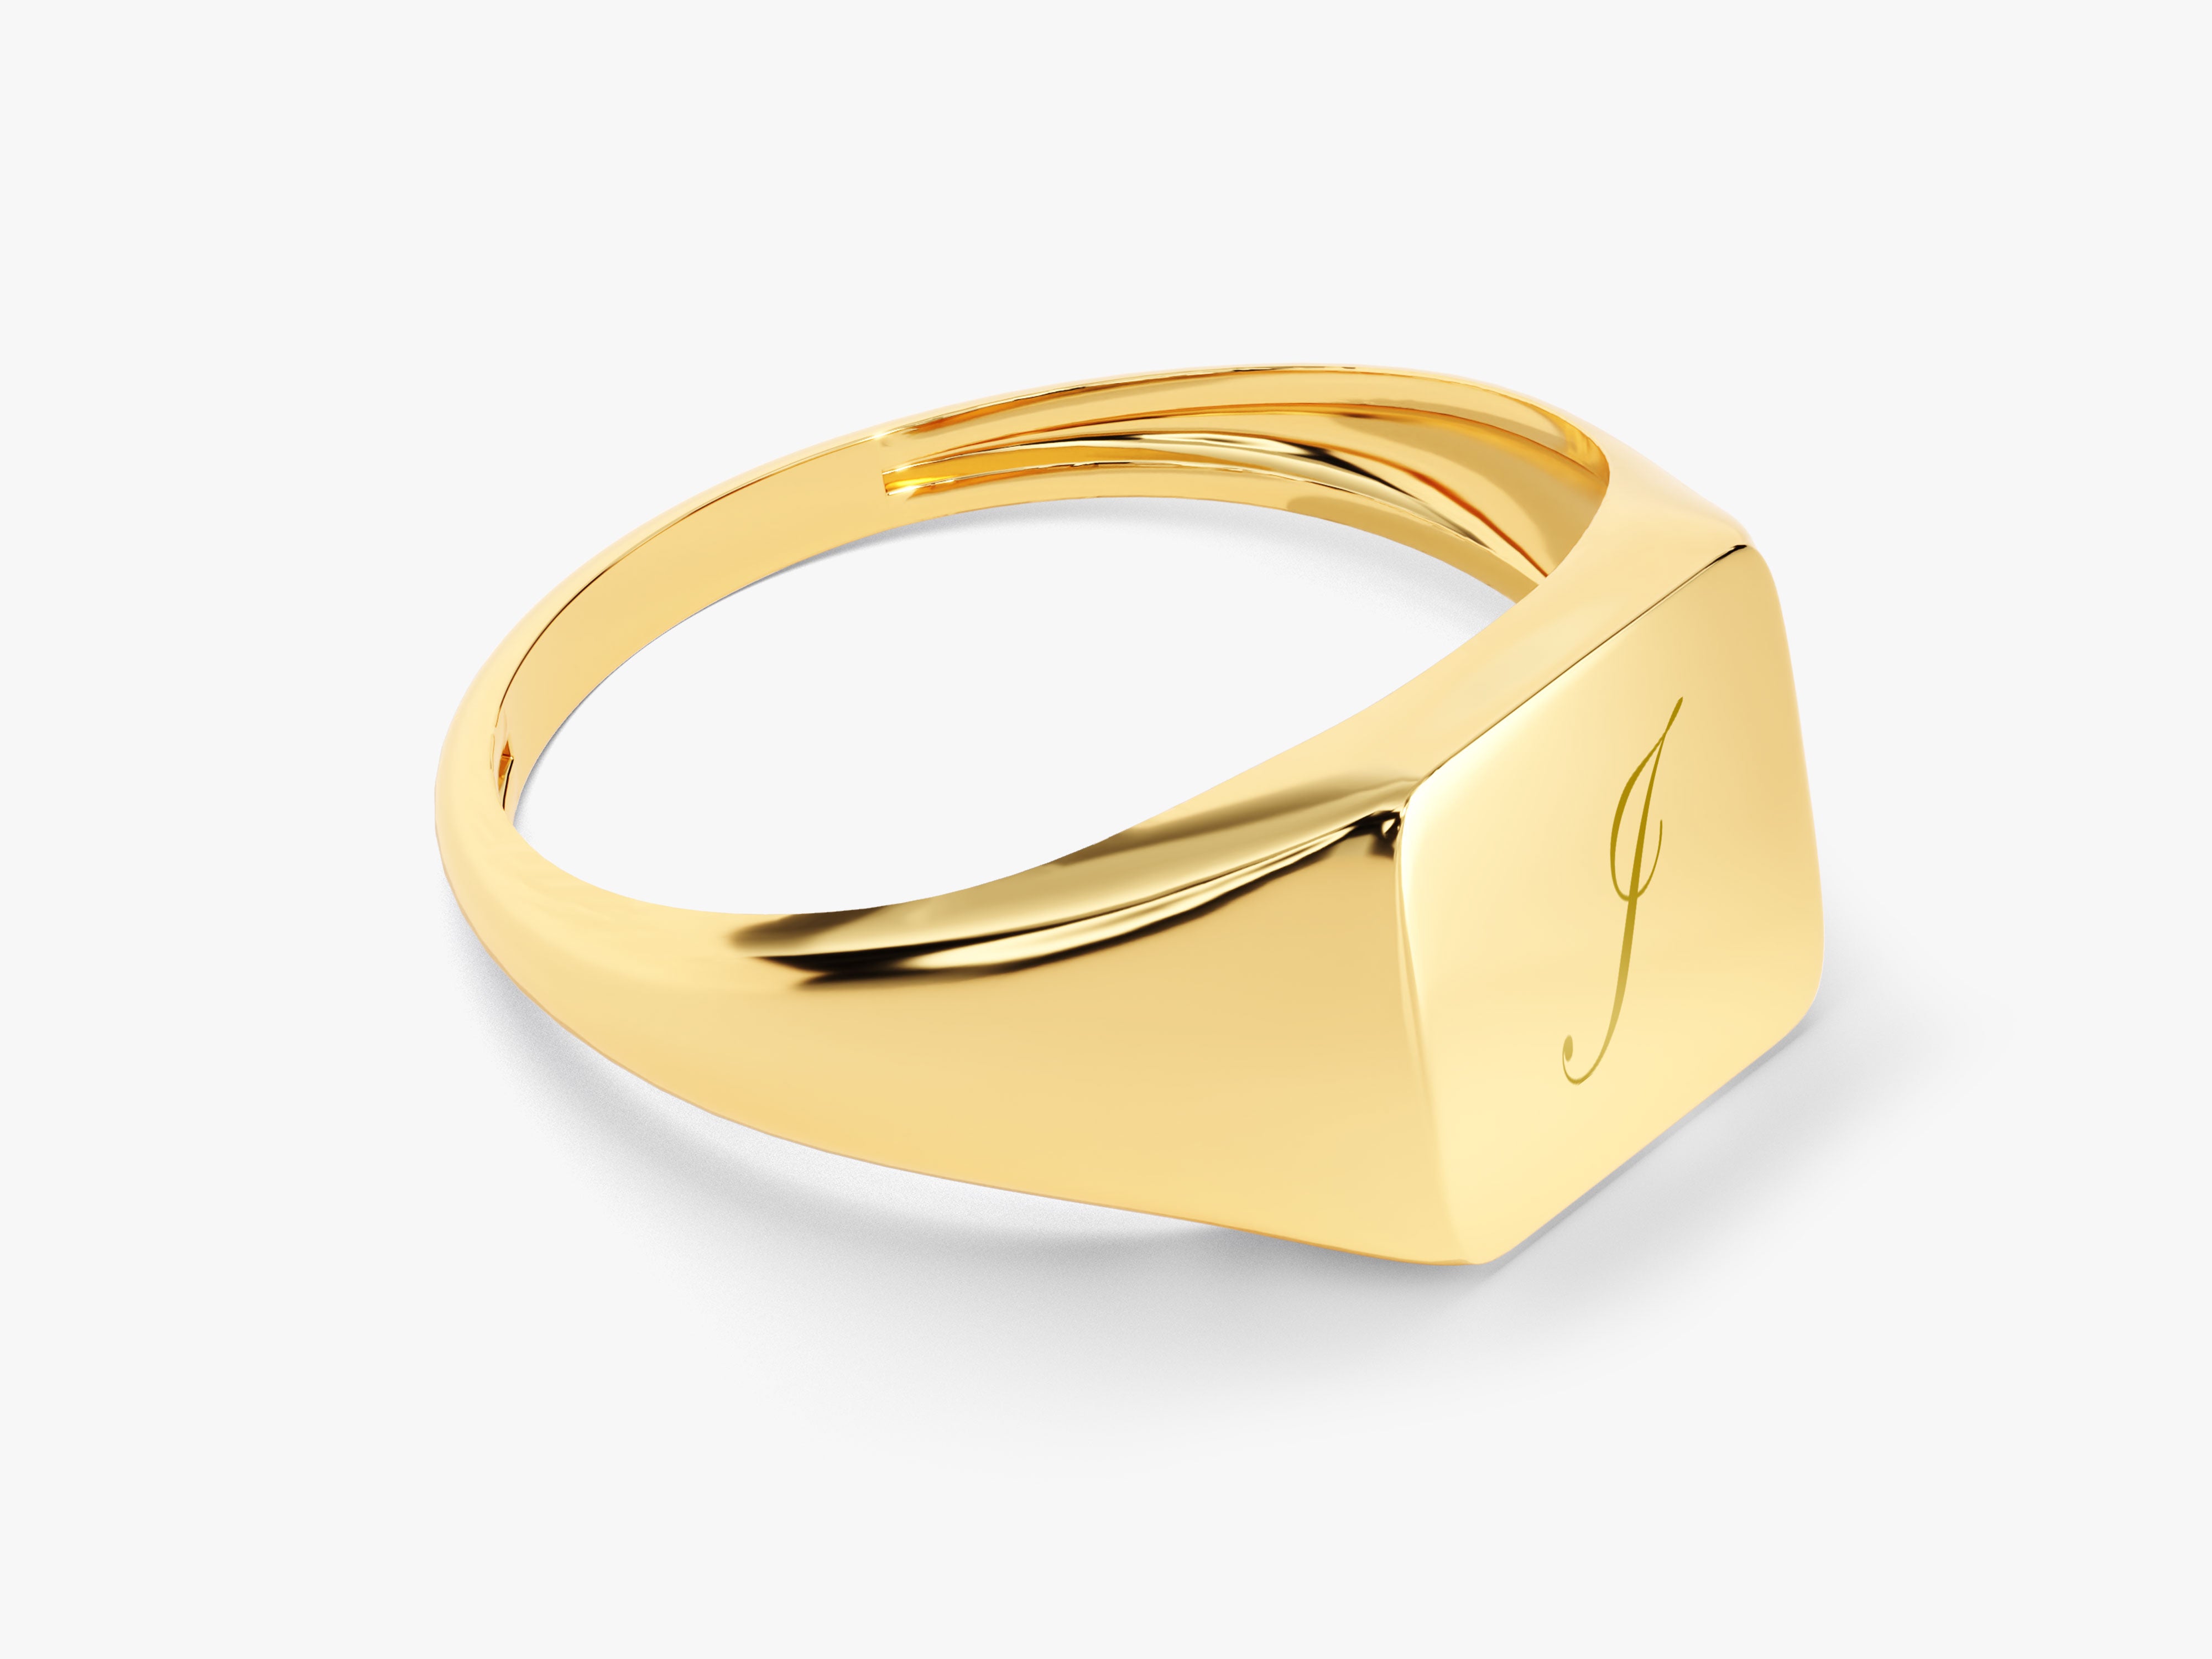 Dsquared2 Gold Signet Ring